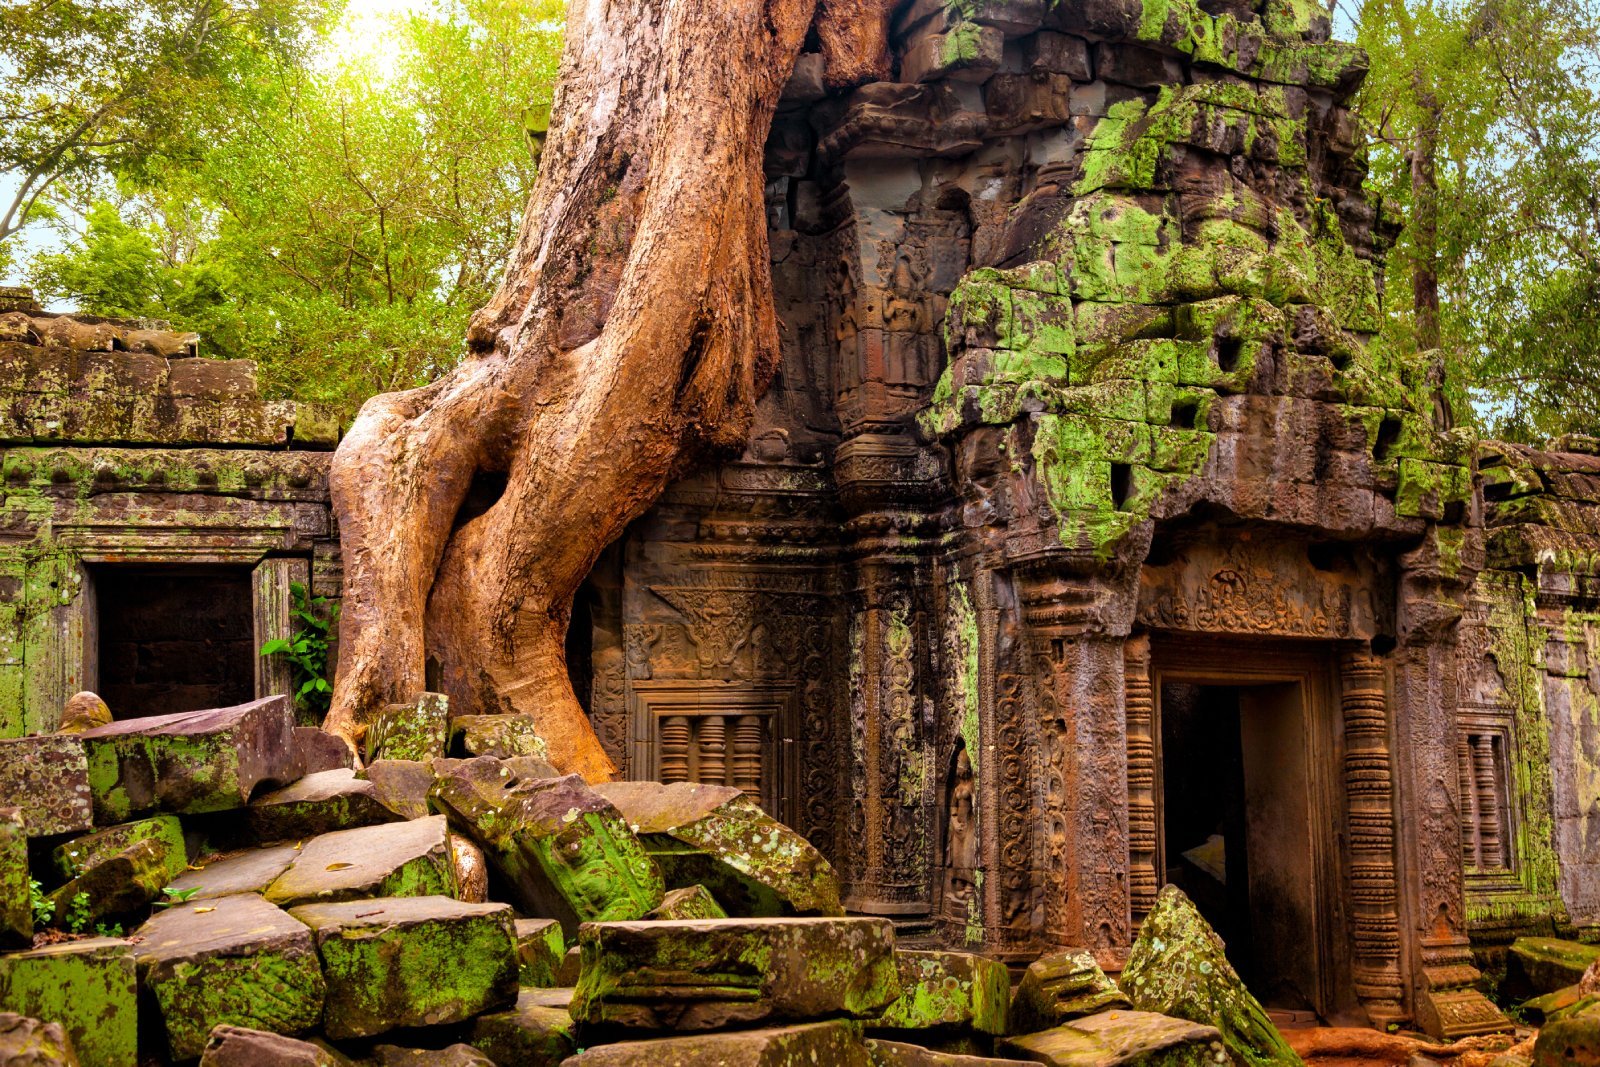 <p><span>After Angkor Wat, head to Ta Prohm, the temple famous for its intertwining trees and roots. This temple, a fusion of nature and architecture, provides a unique perspective on the Angkorian era. Continue to Angkor Thom, the last capital of the Khmer Empire, and visit the Bayon Temple, renowned for its 216 serene stone faces. </span></p> <p><b>My Insider’s Tip: </b><span>Visit Ta Prohm early to avoid crowds and experience the mystical atmosphere in relative solitude.</span></p>